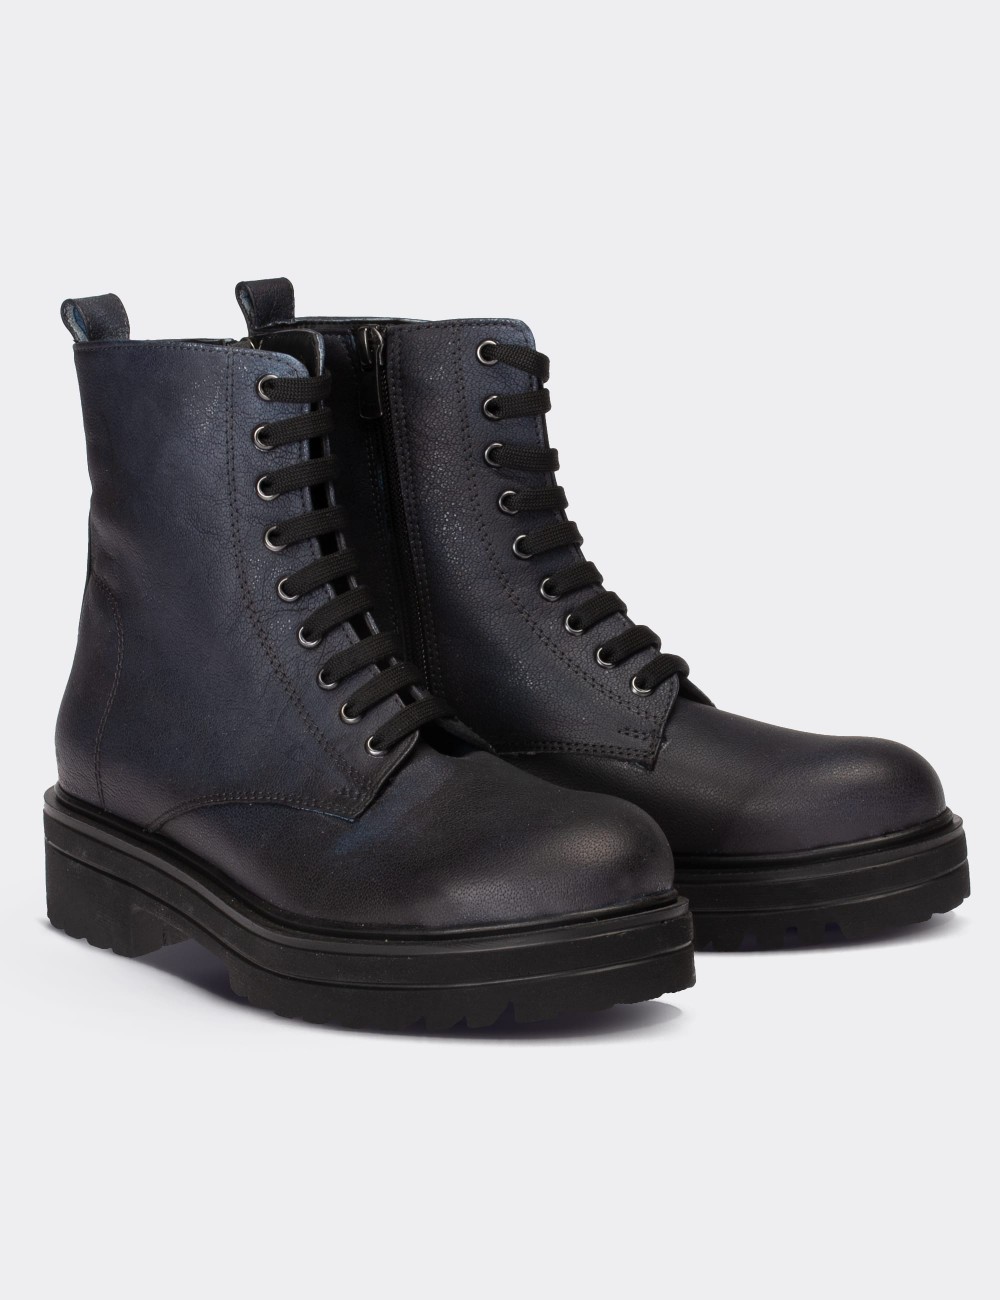 Black  Leather Boots - 01814ZSYHE21